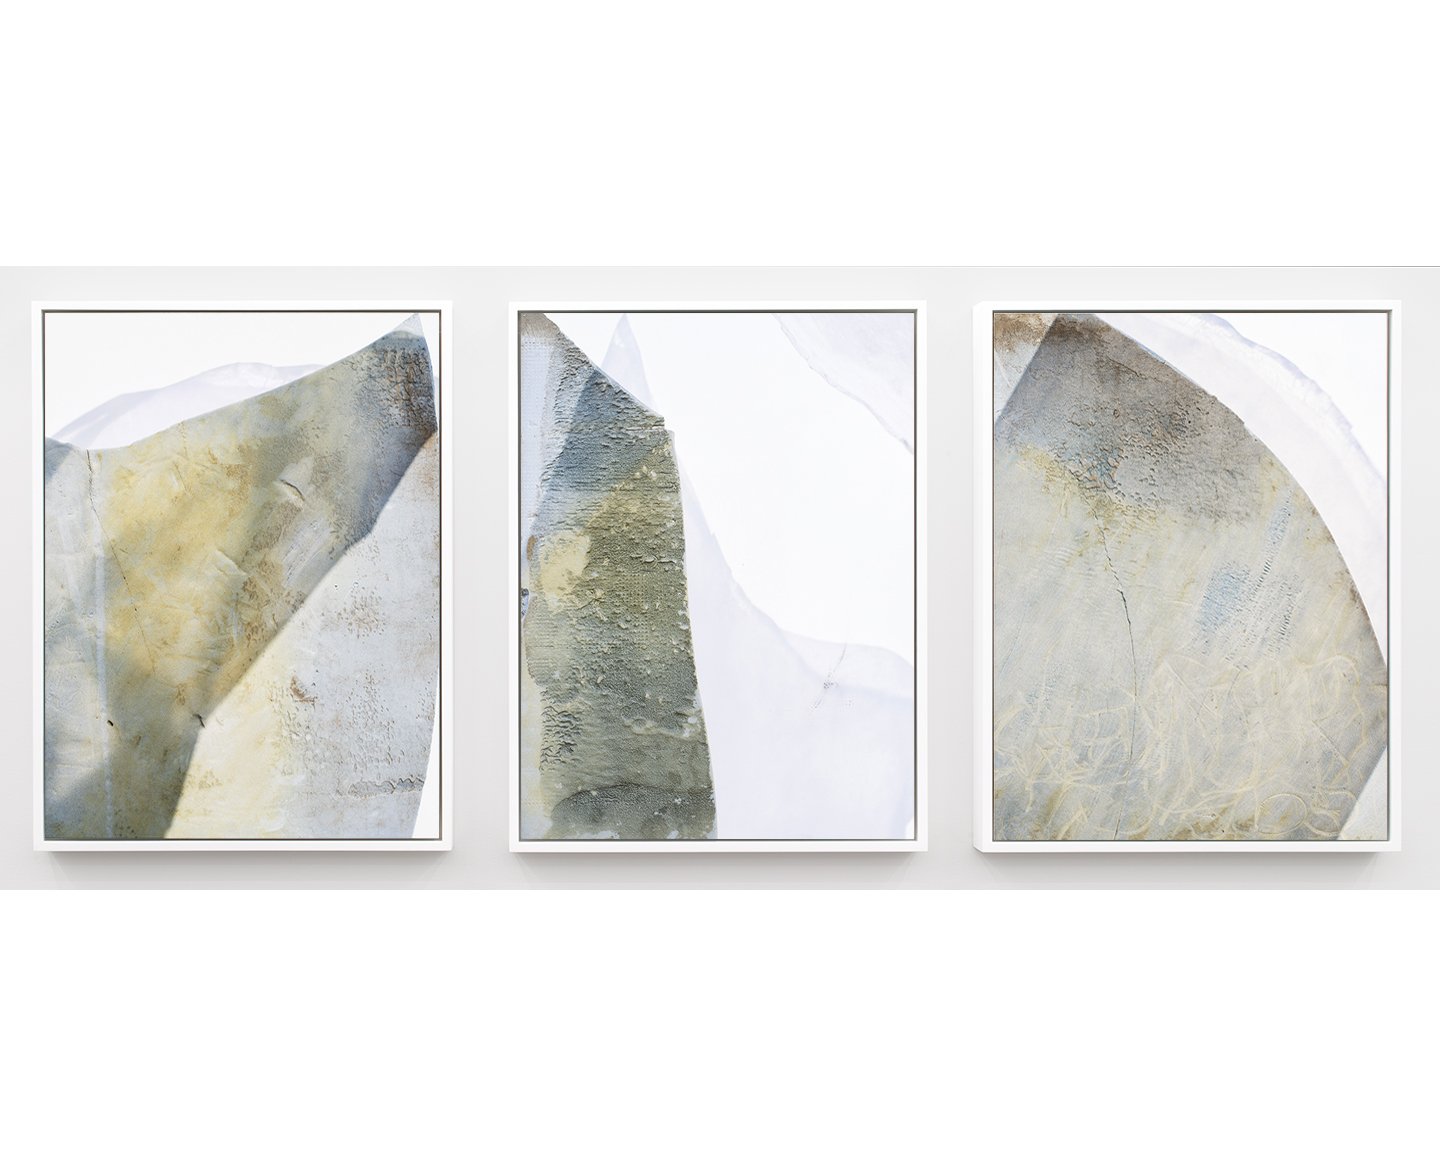   Tablets , 2015 Pigmented Inkjet Prints Wood Frames 3 prints, each 15” x 20” Edition of 5 plus 2 Artist Proofs 